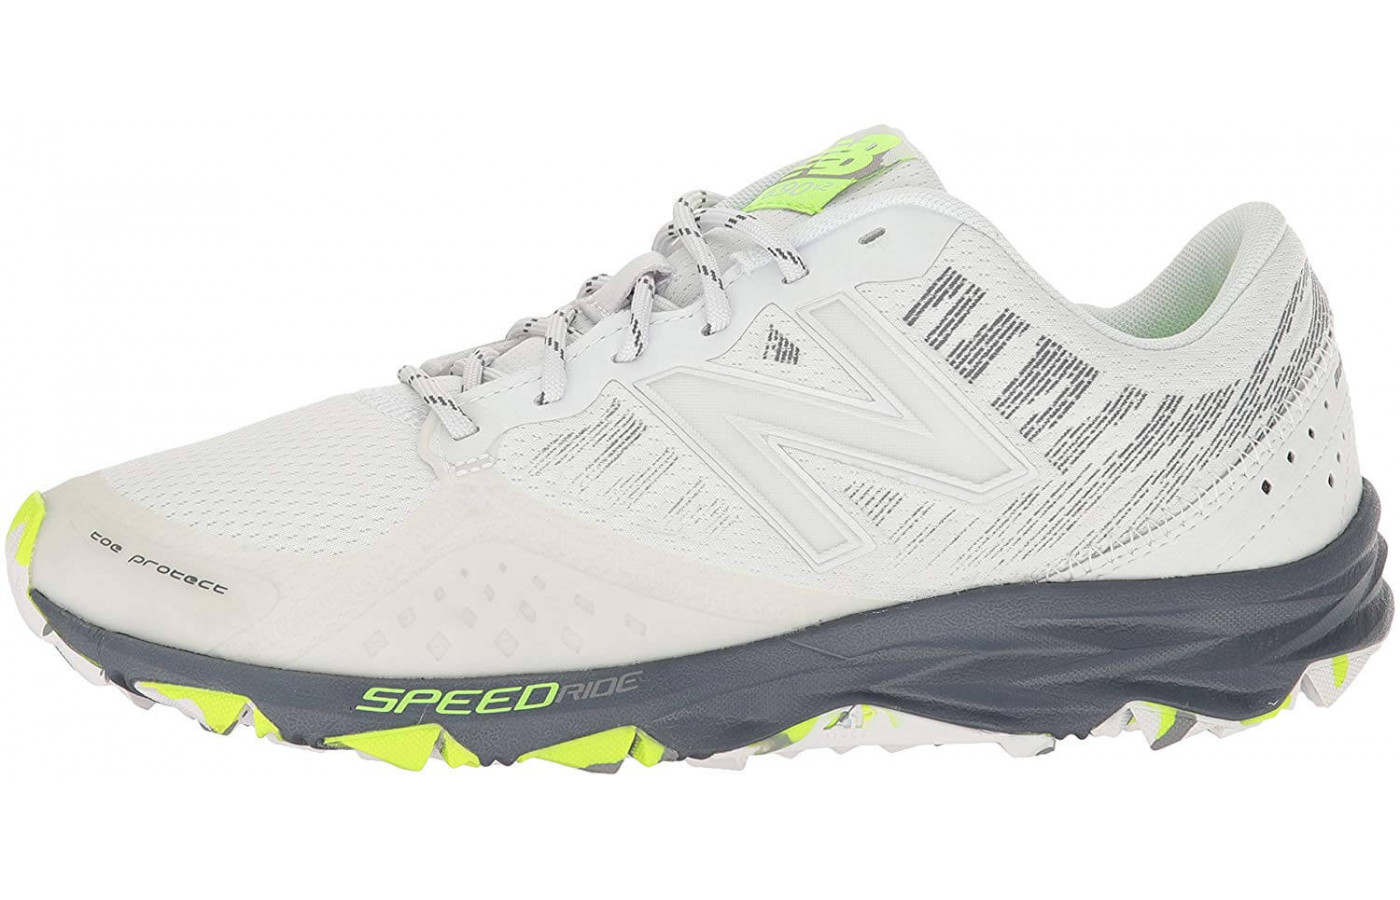 The 690v2 Trail features a synthetic mesh upper